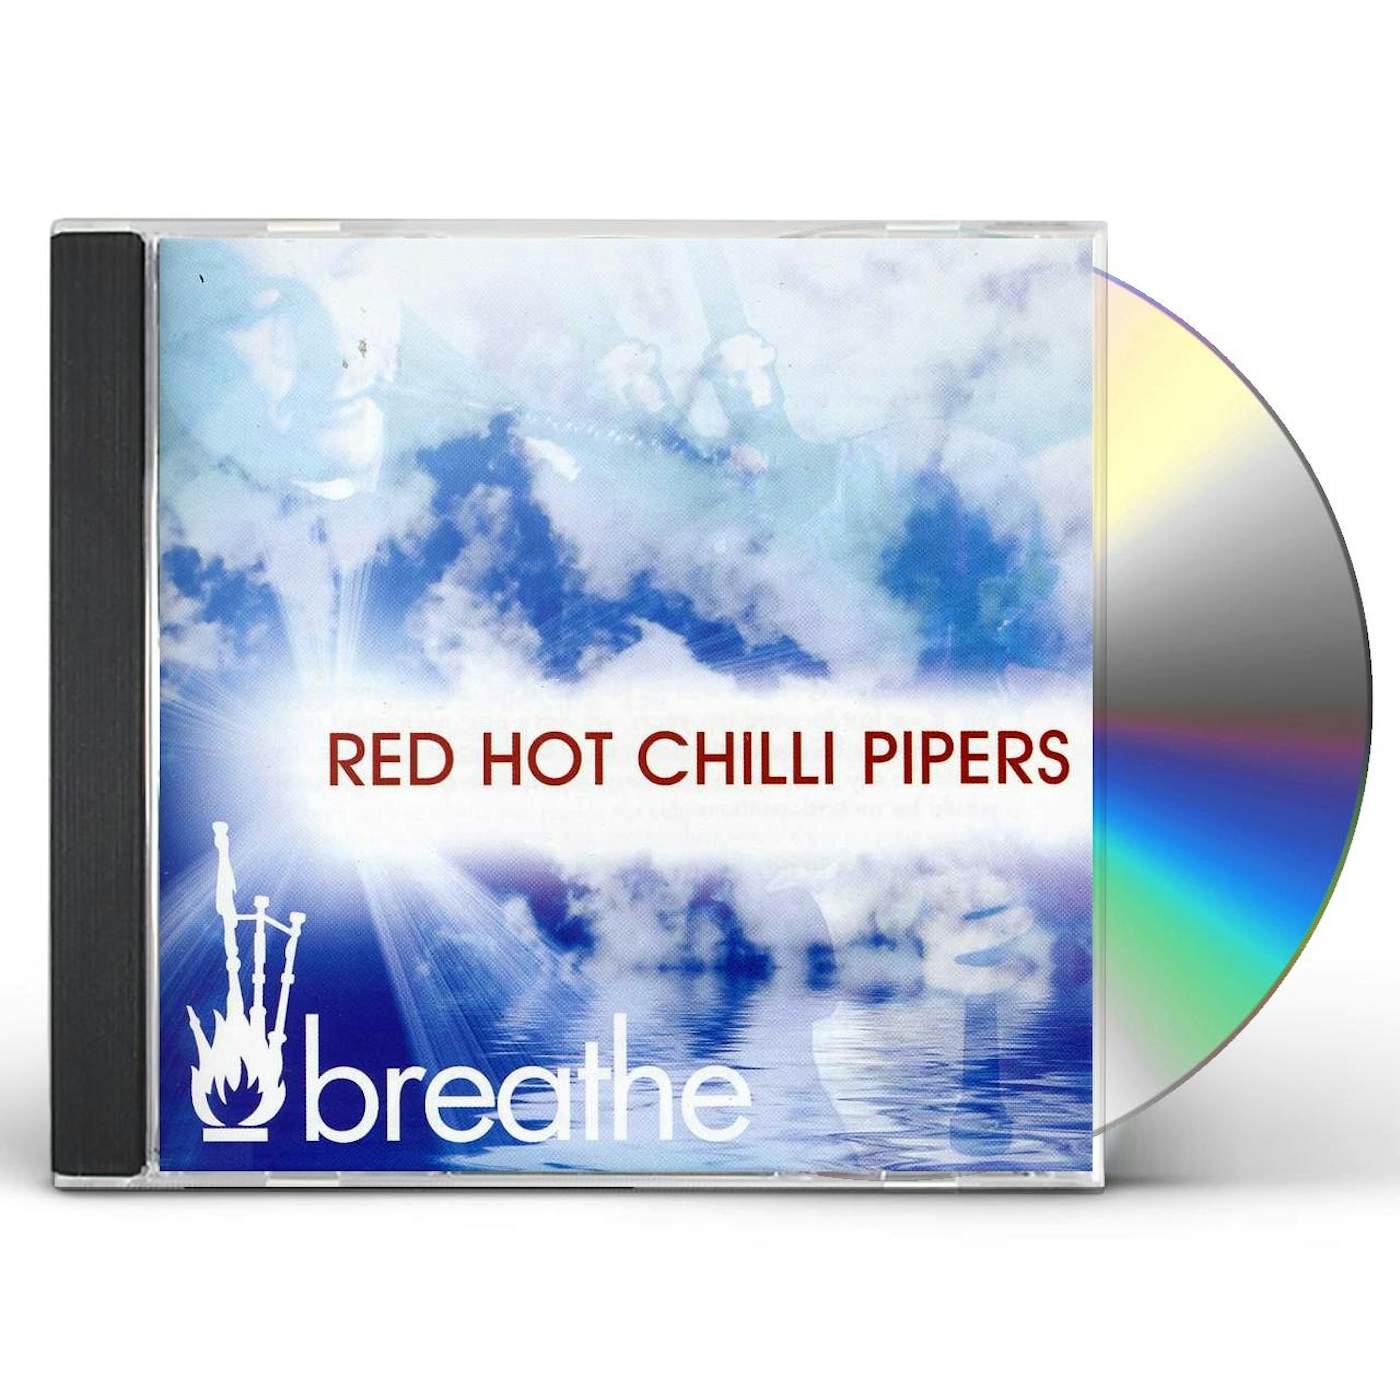 Red Hot Chilli Pipers BREATHE CD